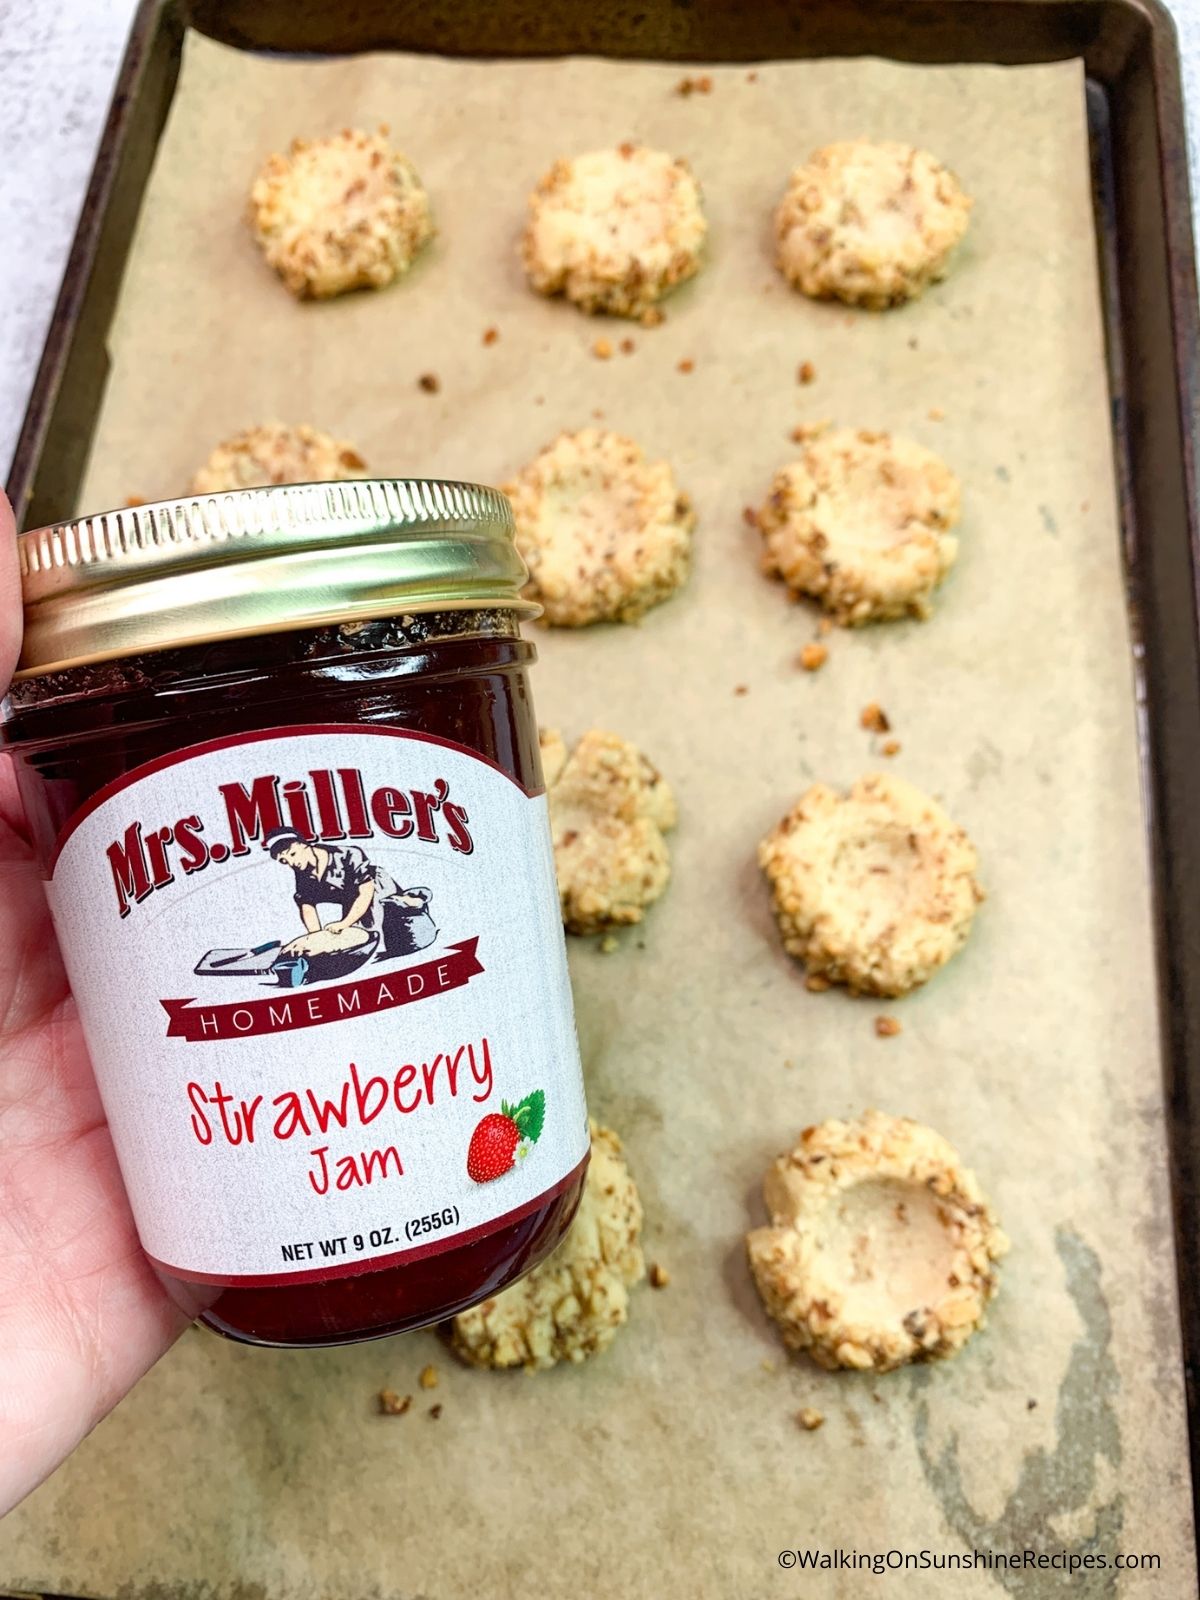 Add jam to baked cookies.